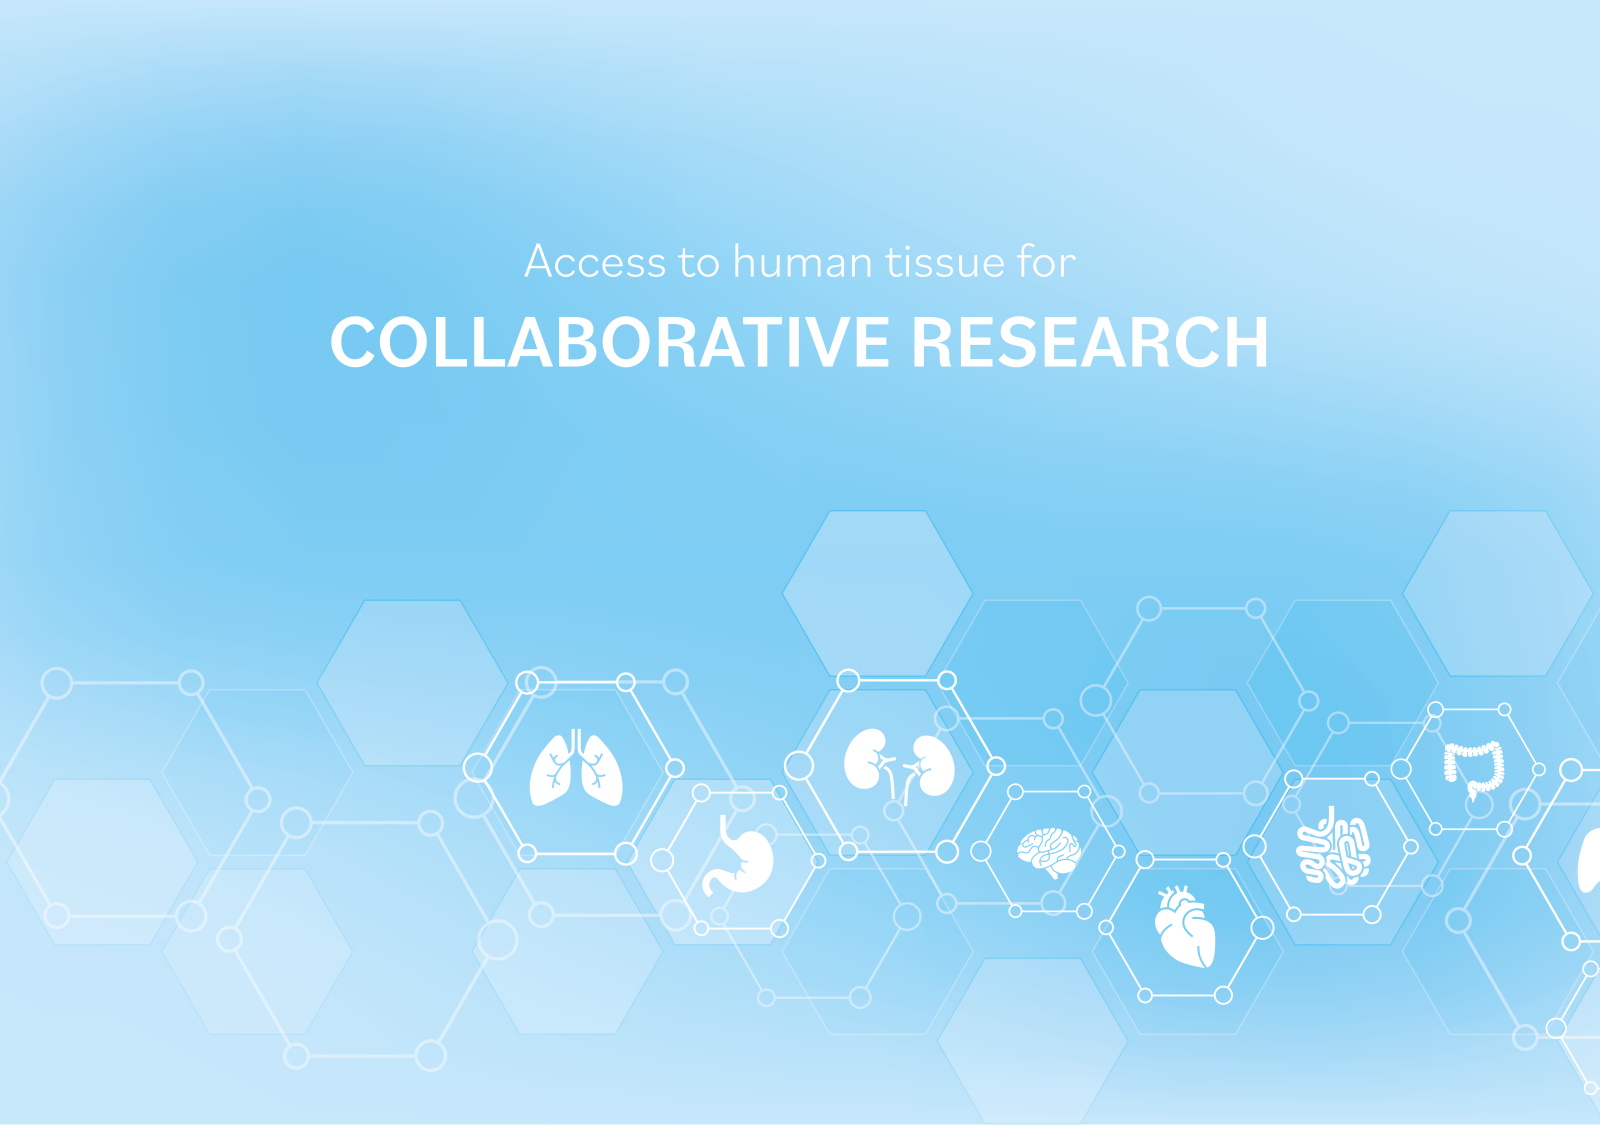 Access to Human Tissue for Collaborative Research